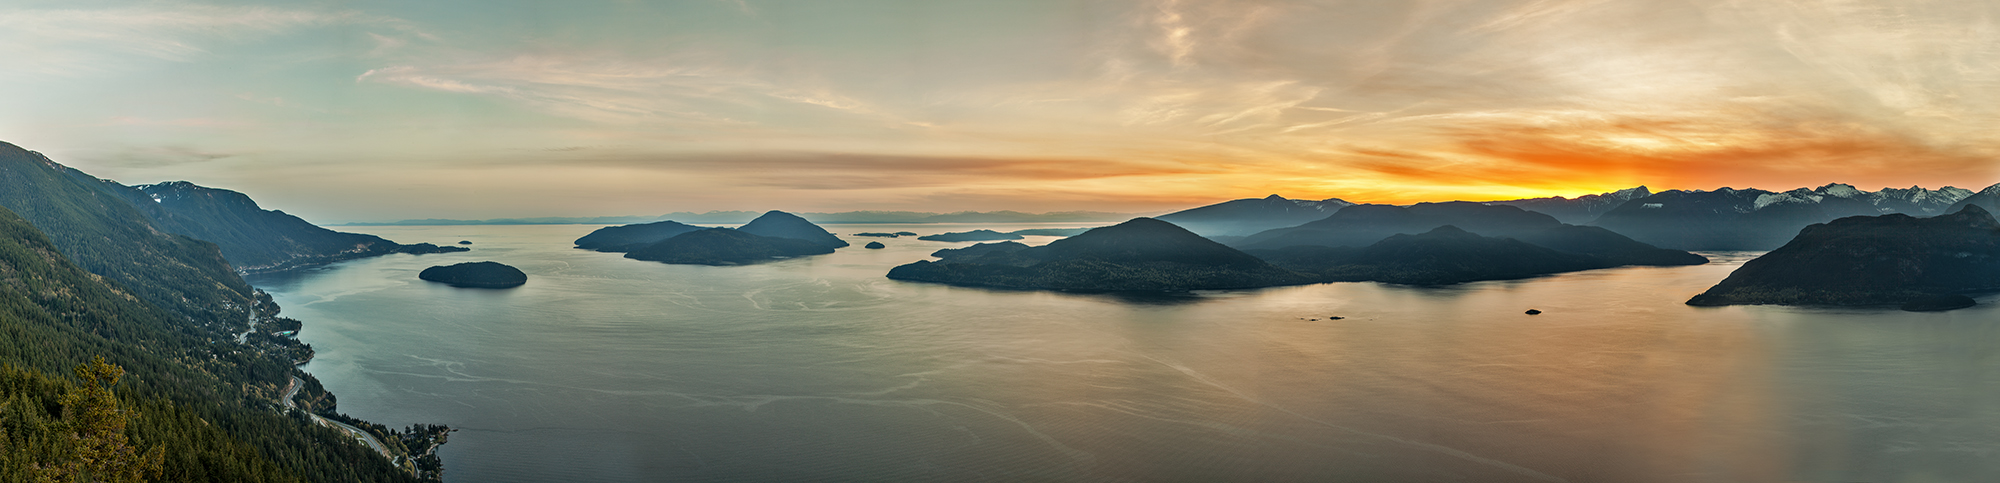 Ultra-High-Resolution-Panoramic-Image-Howe-Sound-Highway-99-Tunnel-Bluffs-Sunset-BC-Canada